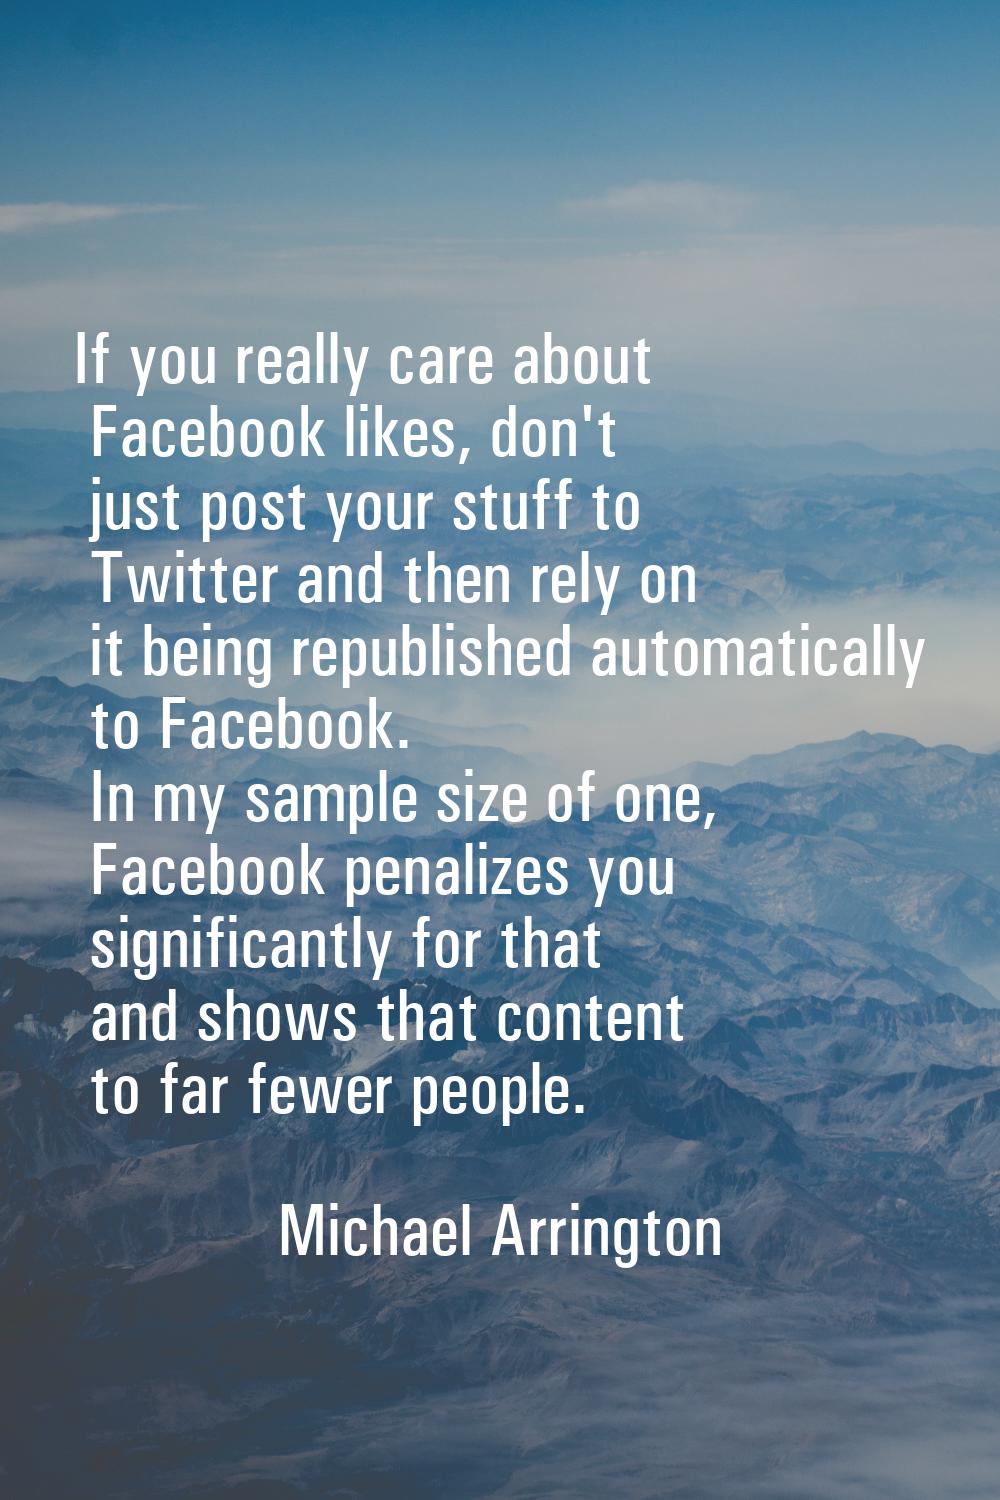 If you really care about Facebook likes, don't just post your stuff to Twitter and then rely on it 